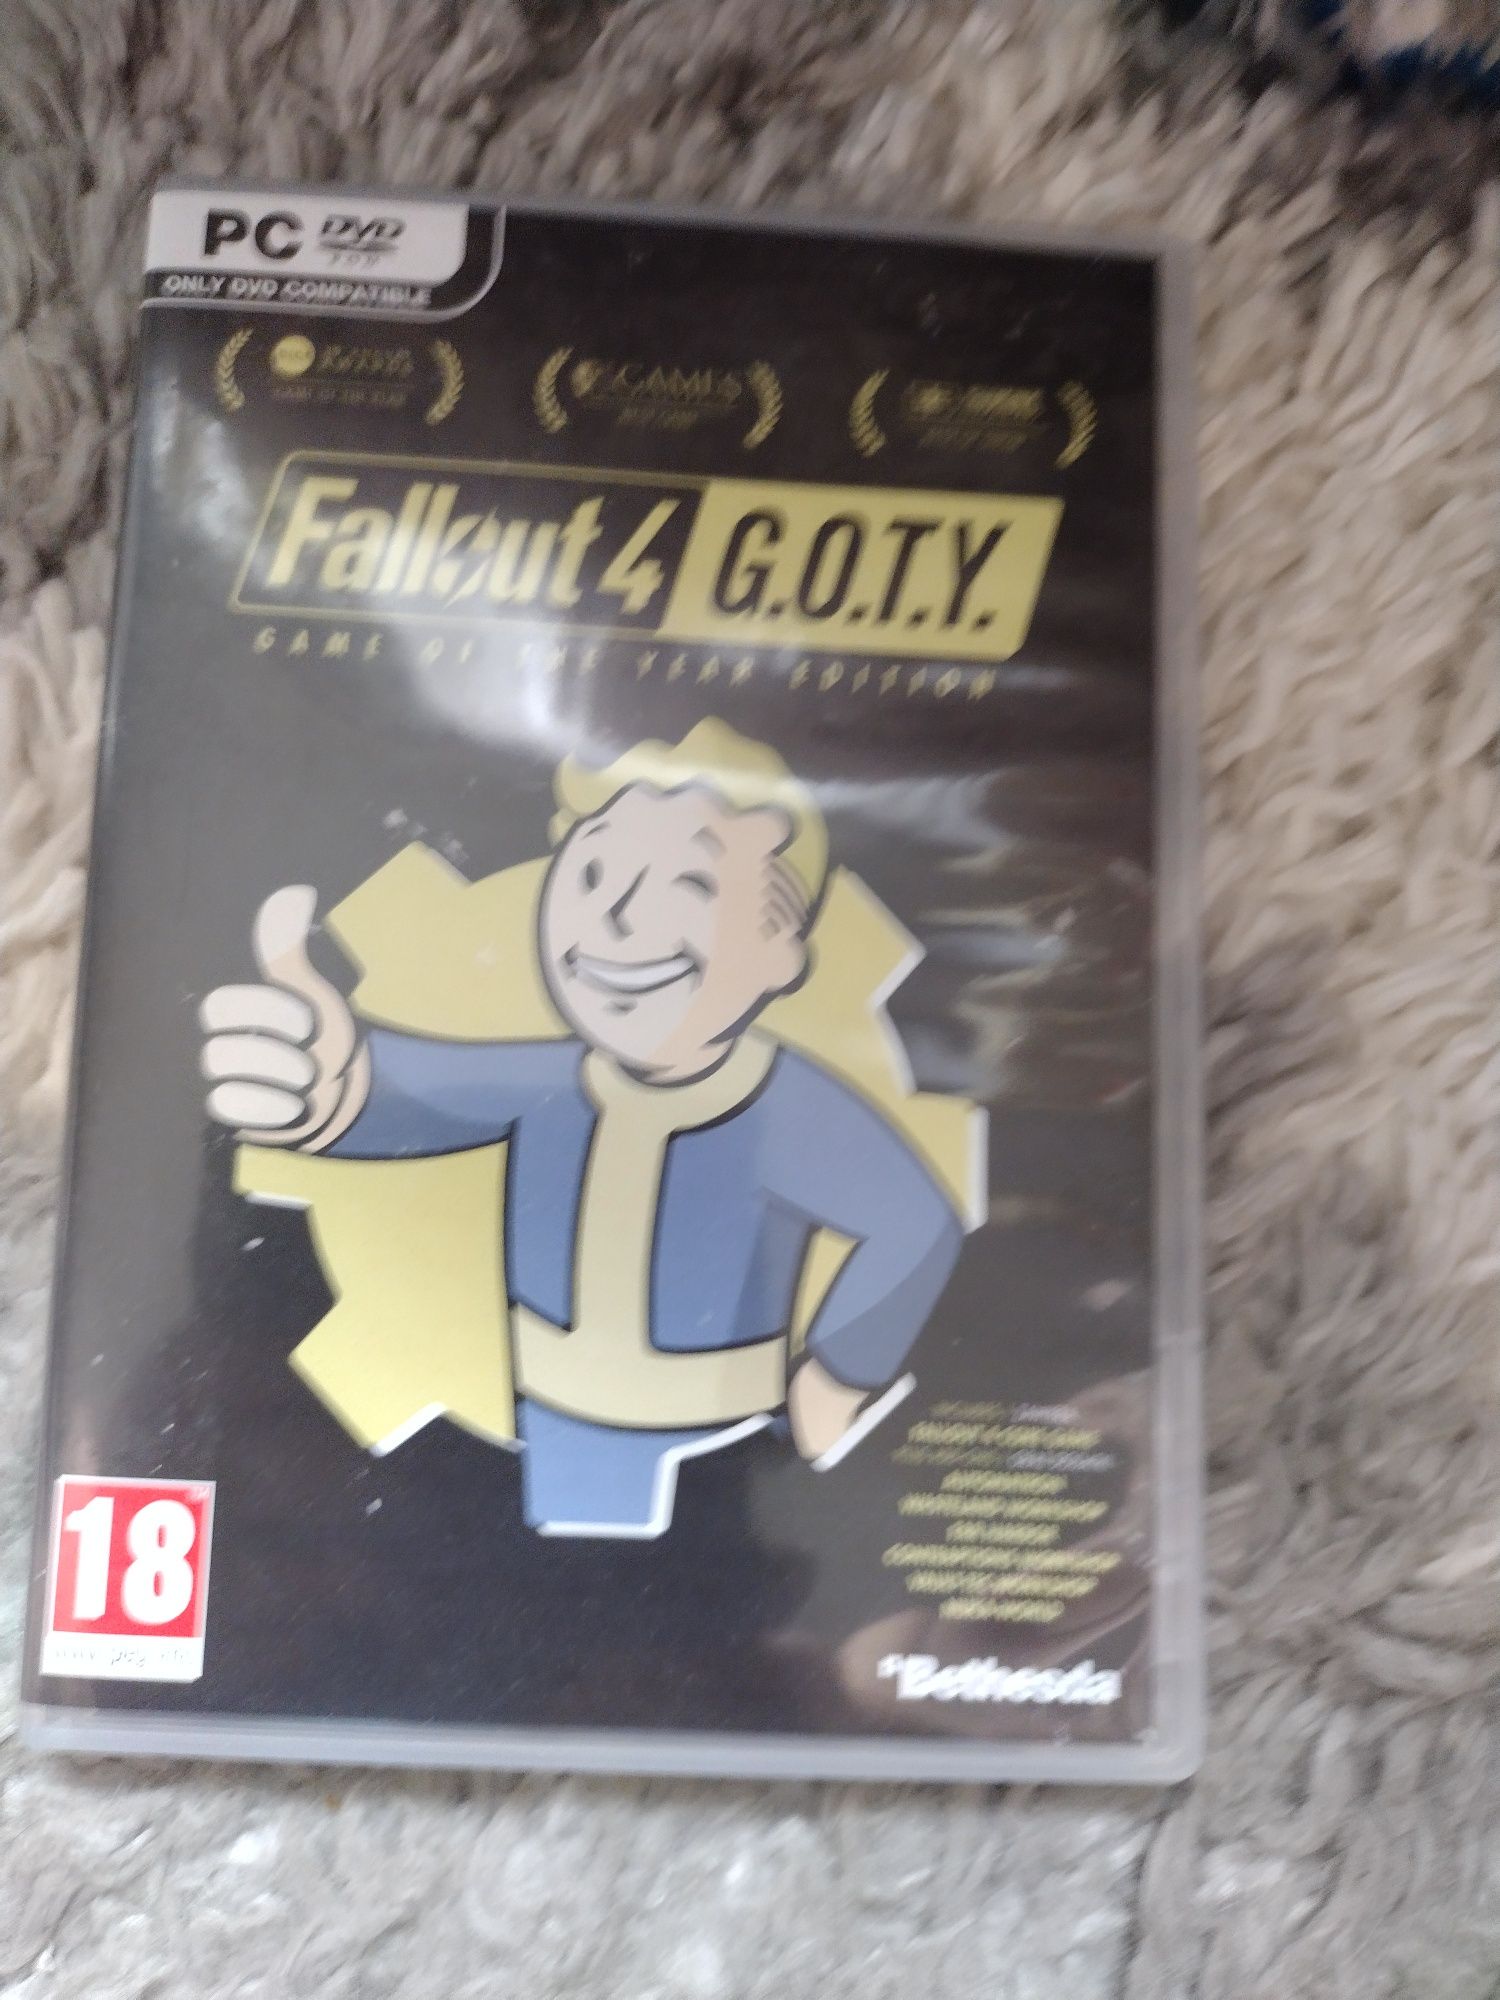 Gra na PC Fallout 4 G.O.T.Y.